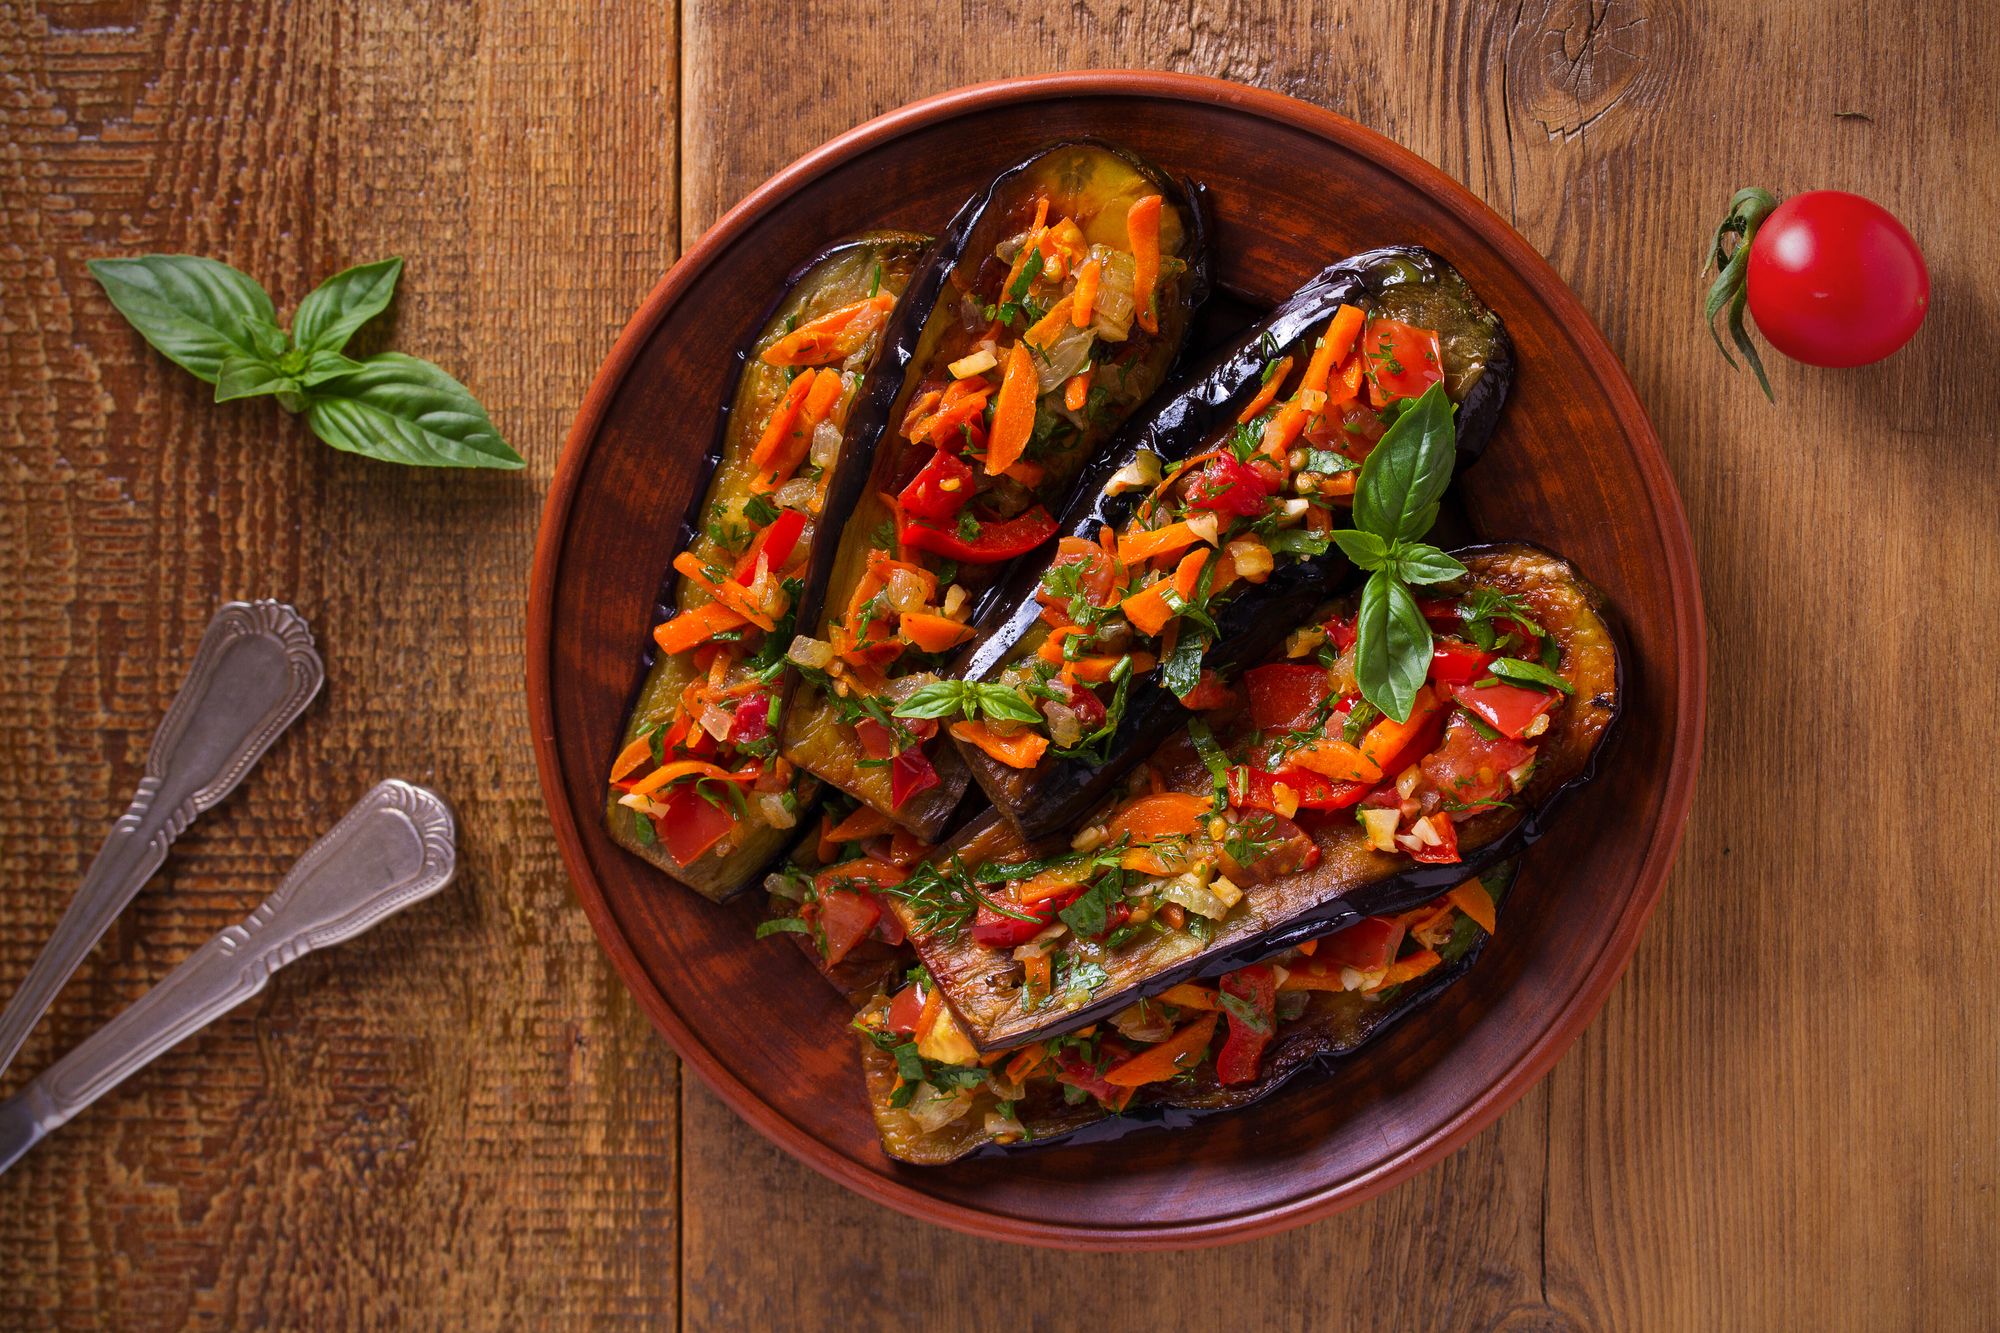 Roasted Eggplant with Tomato and Pine Nuts